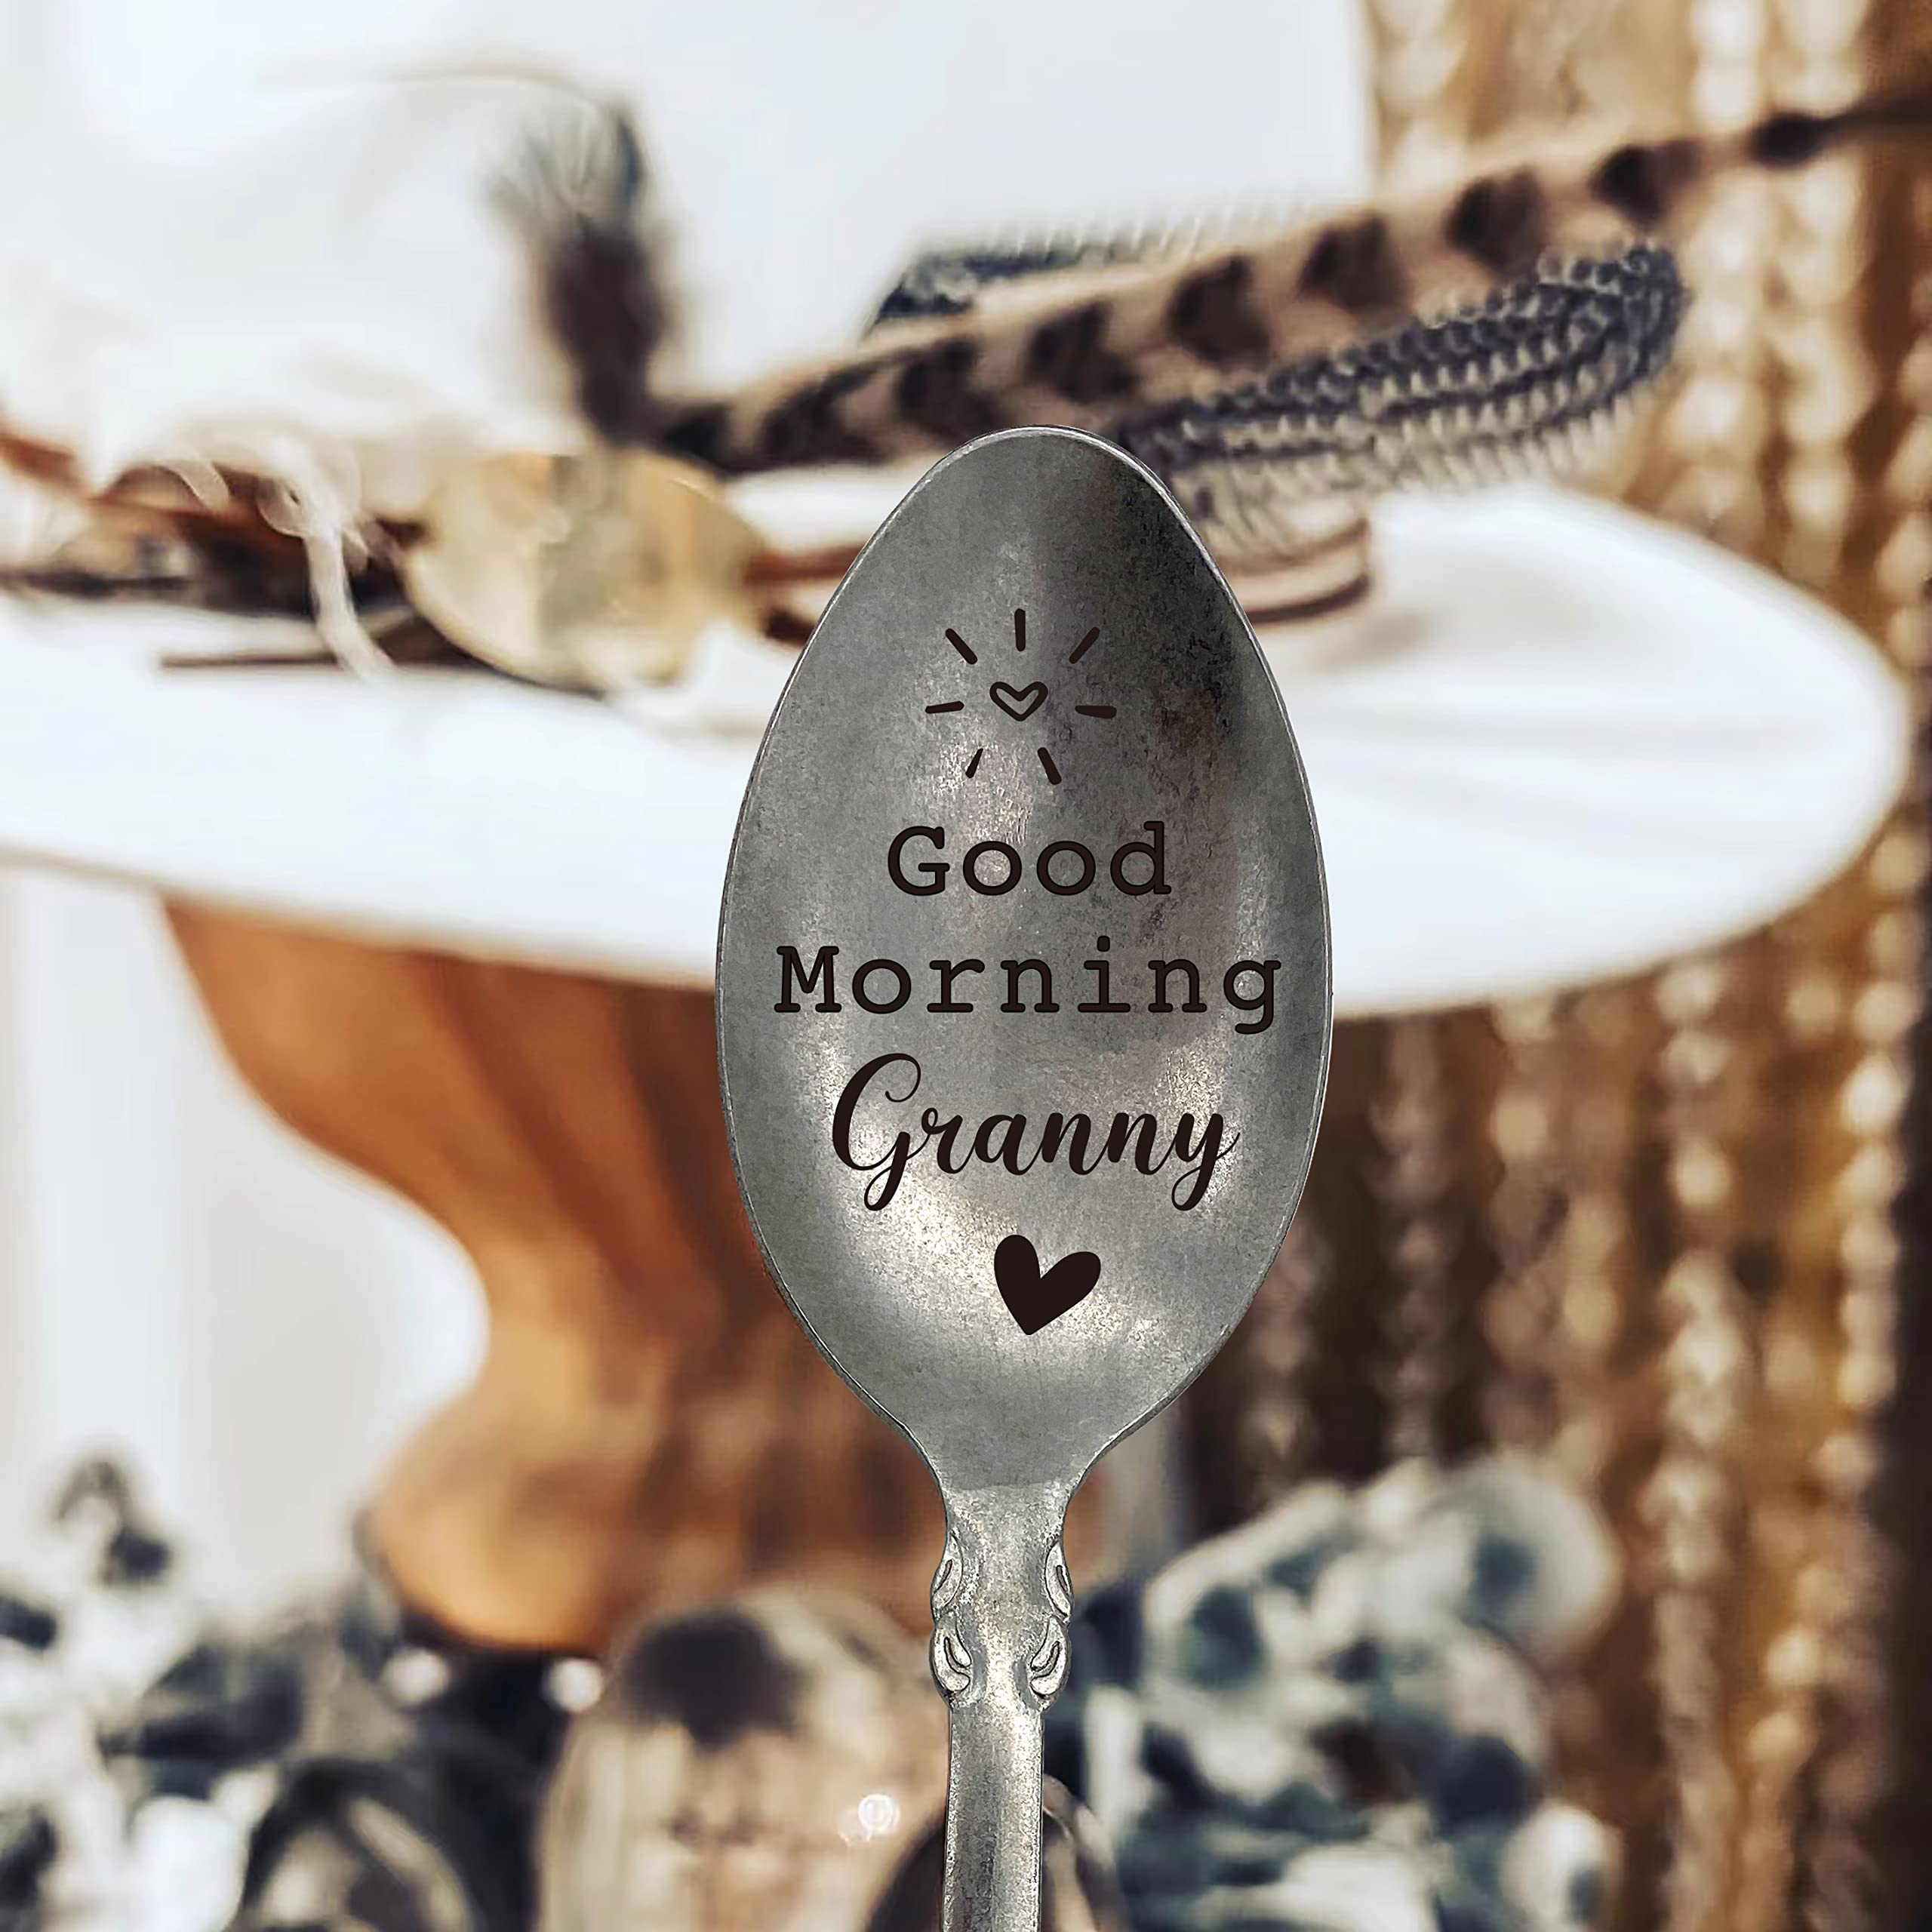 Good Morning Granny Spoon Funny Stainless Steel Engraved Spoon, Retro Matte Long Handle Coffee Tea Spoon Dessert Ice Cream Spoon for Granny Birthday Mother's Day Christmas Spoon Gifts